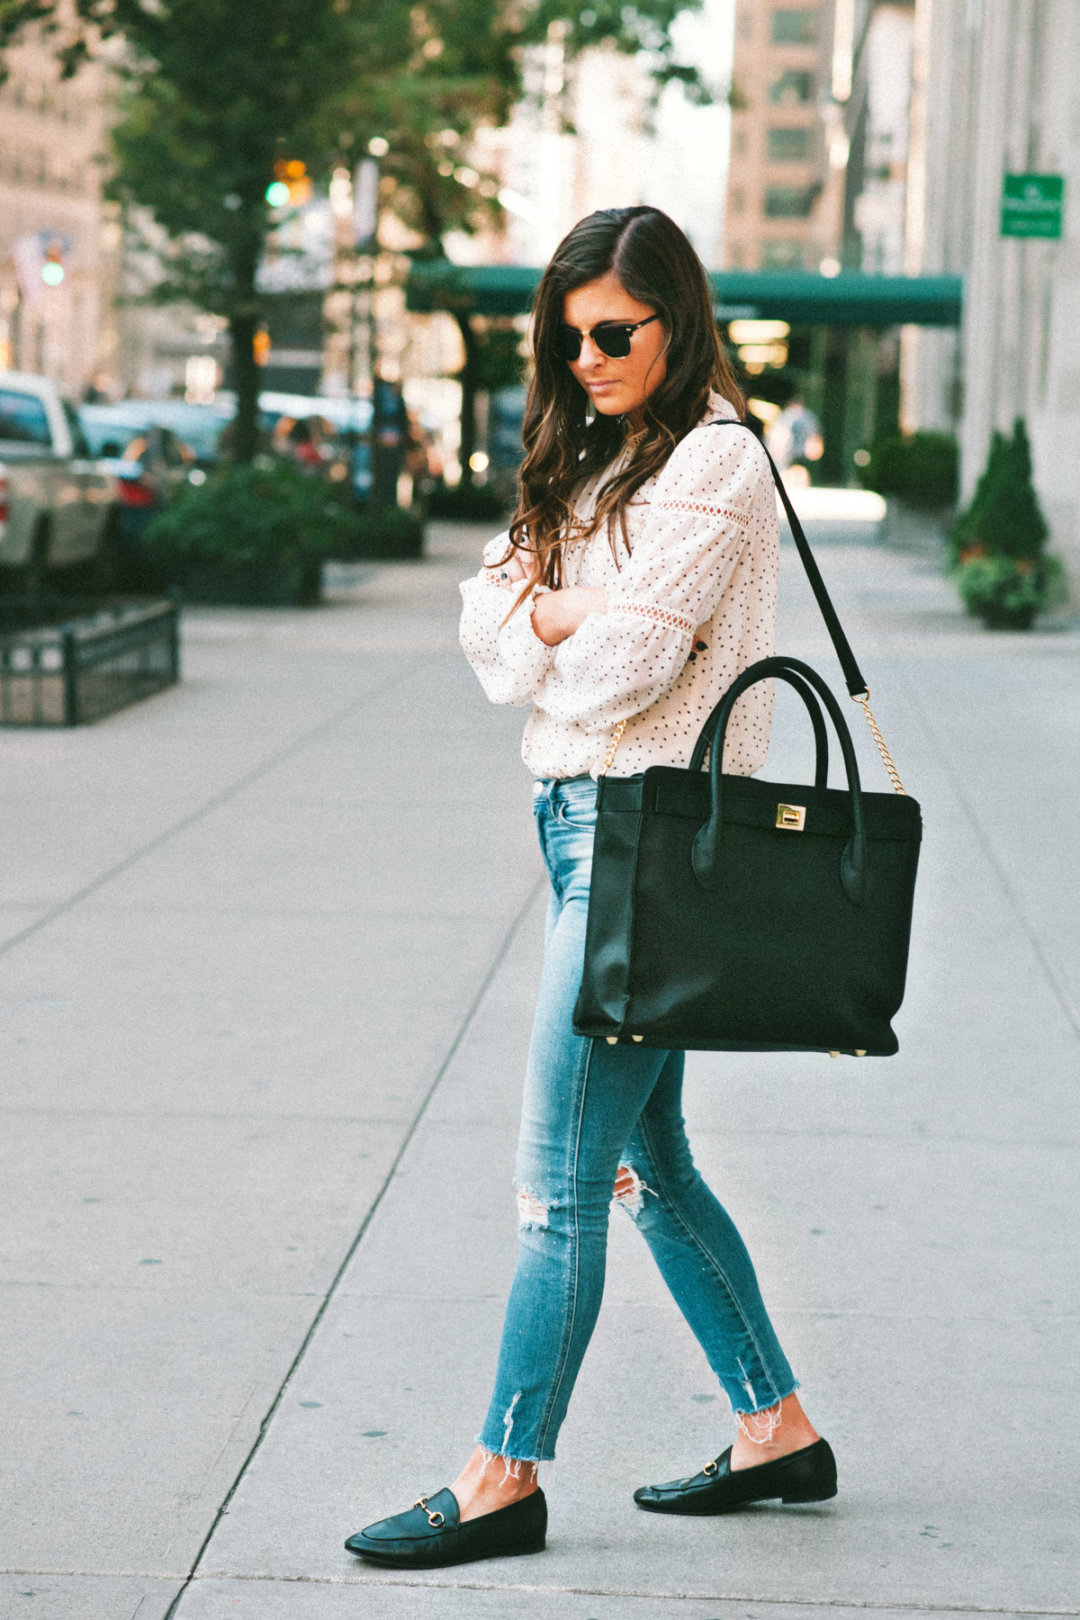 For The Working Woman: You (Tote)ally Need This Bag